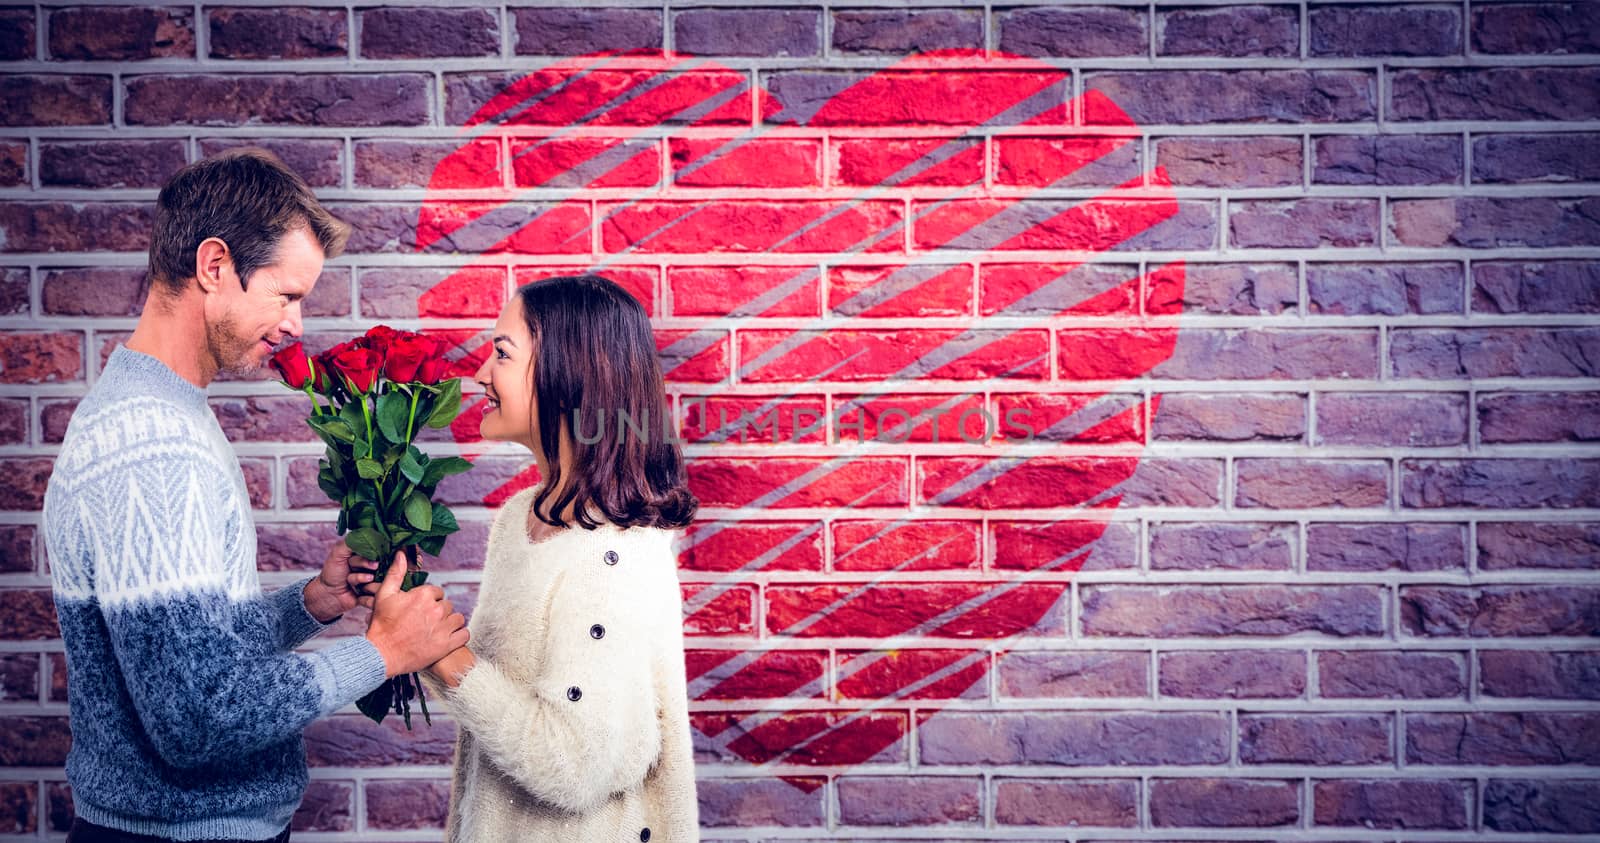 Romantic couple holding red roses against red brick wall